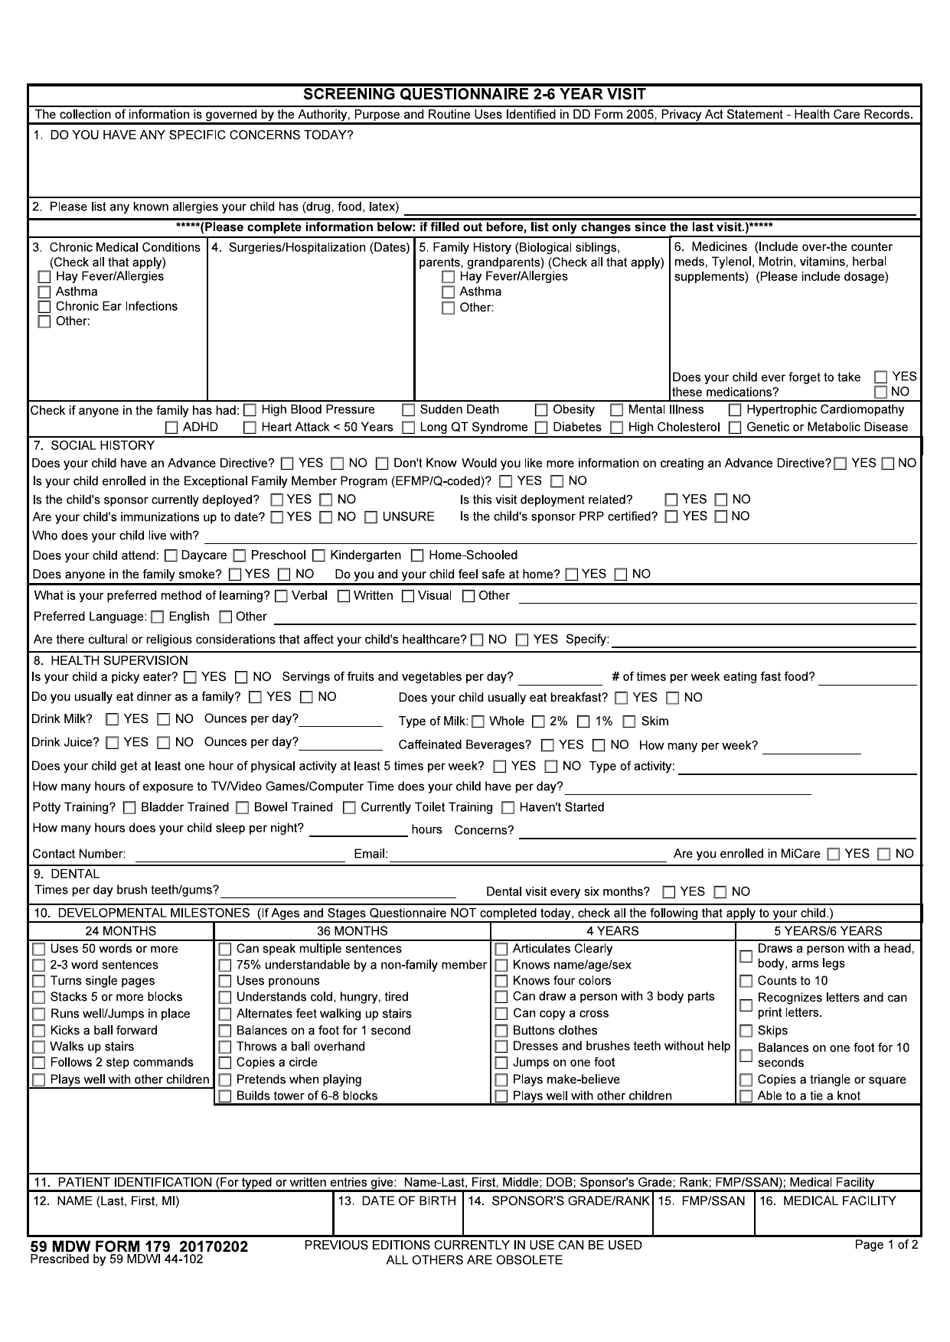 59 MDW Form 179 Screening Questionnaire 2-5 Year Visit, Page 1